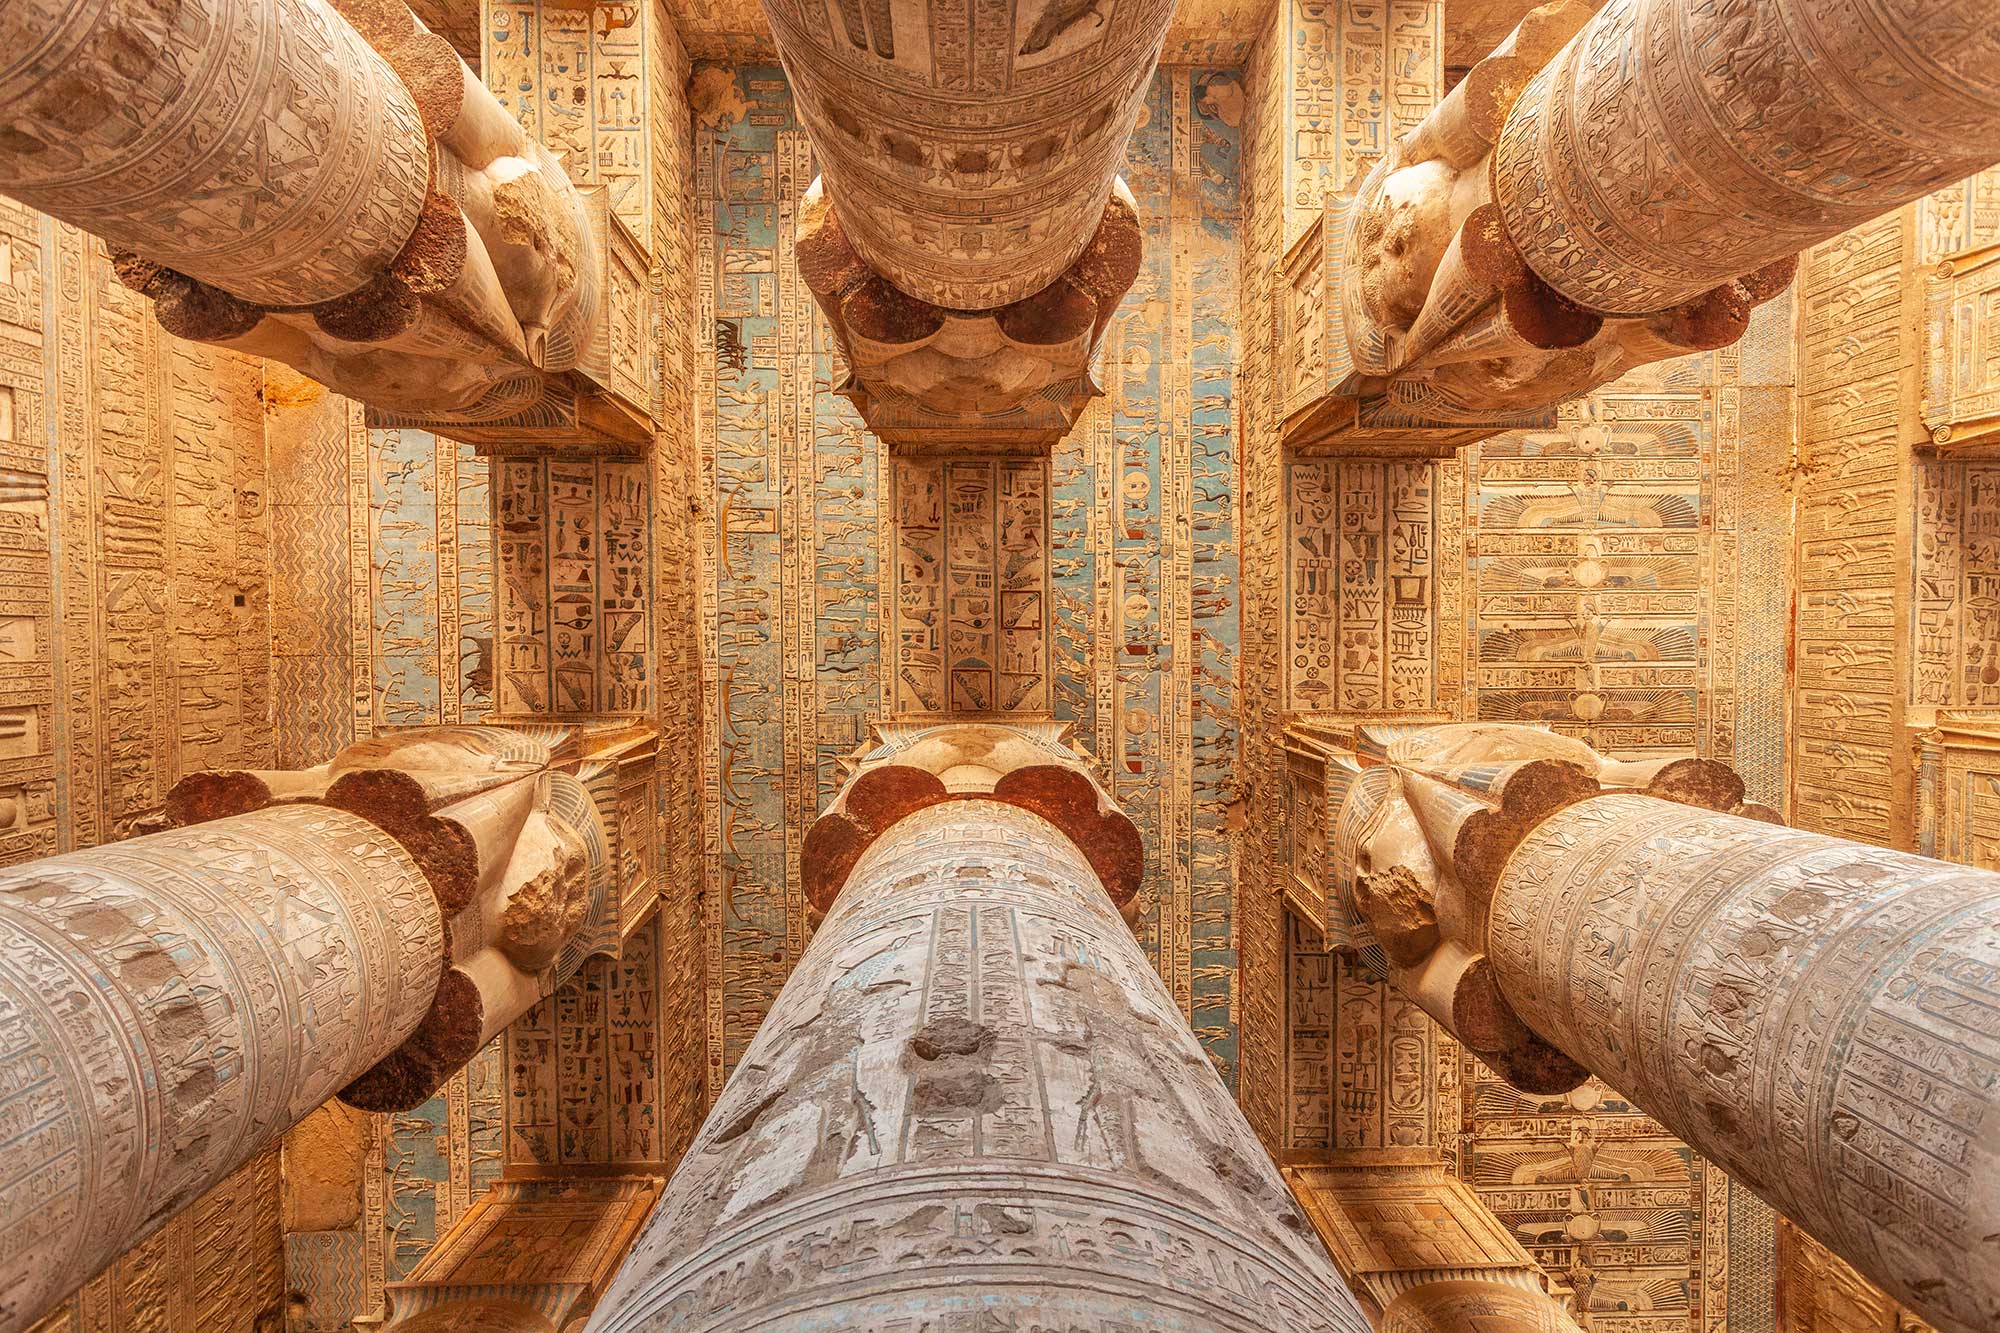 The magnificent ceiling inside the Tempel of Hathor at Dendera